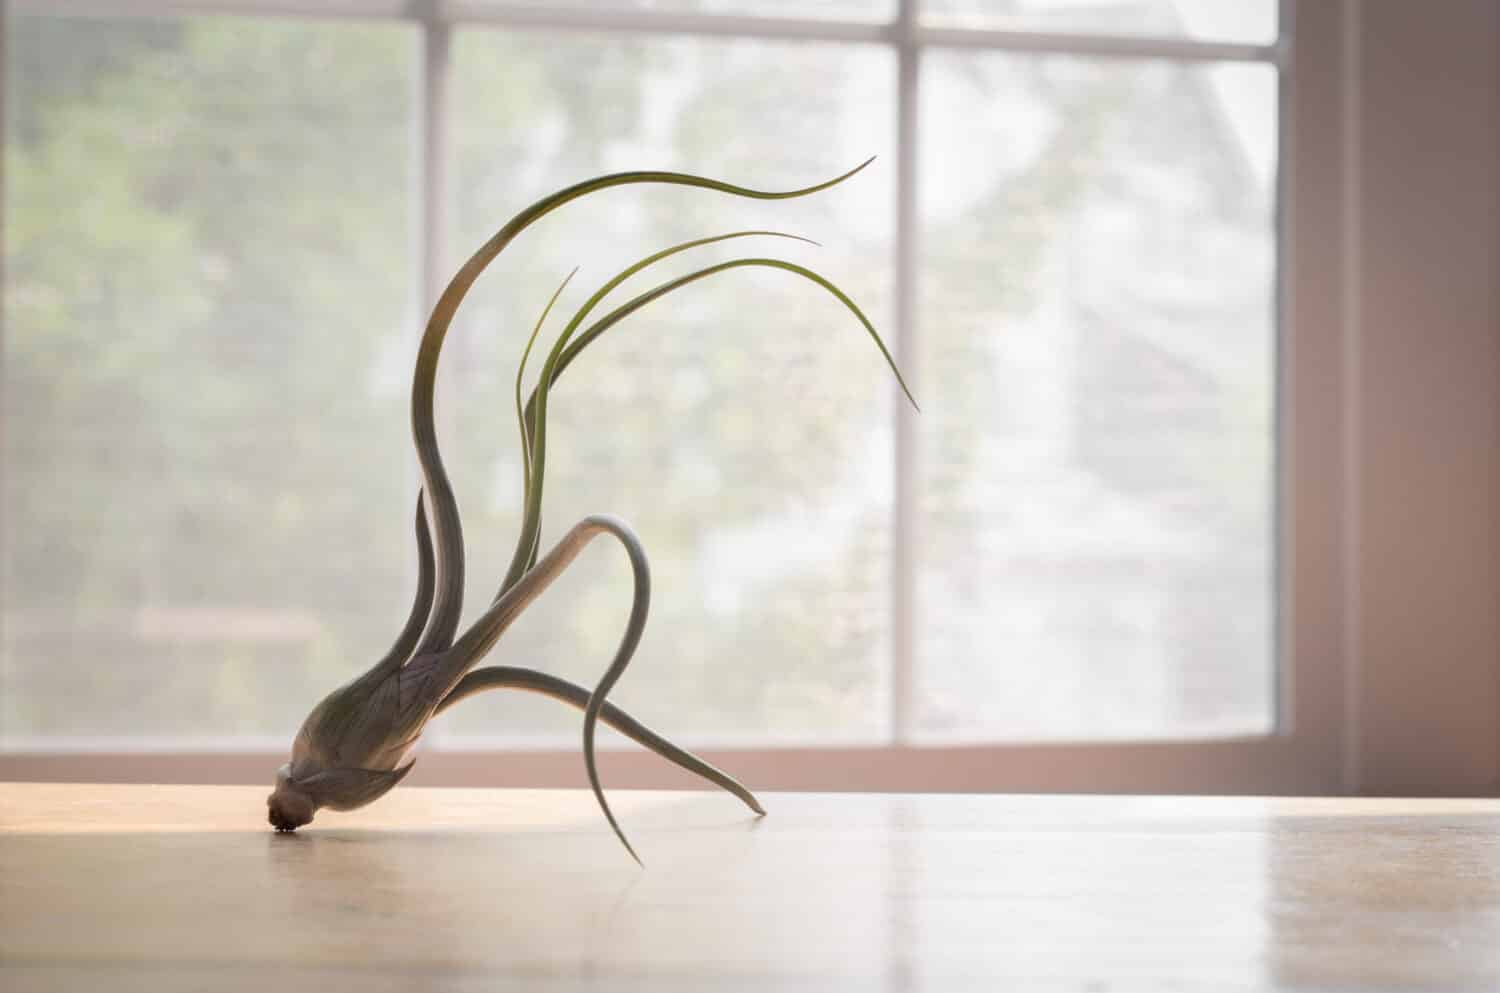 Tillandsia bulbosa air plant in front of window.